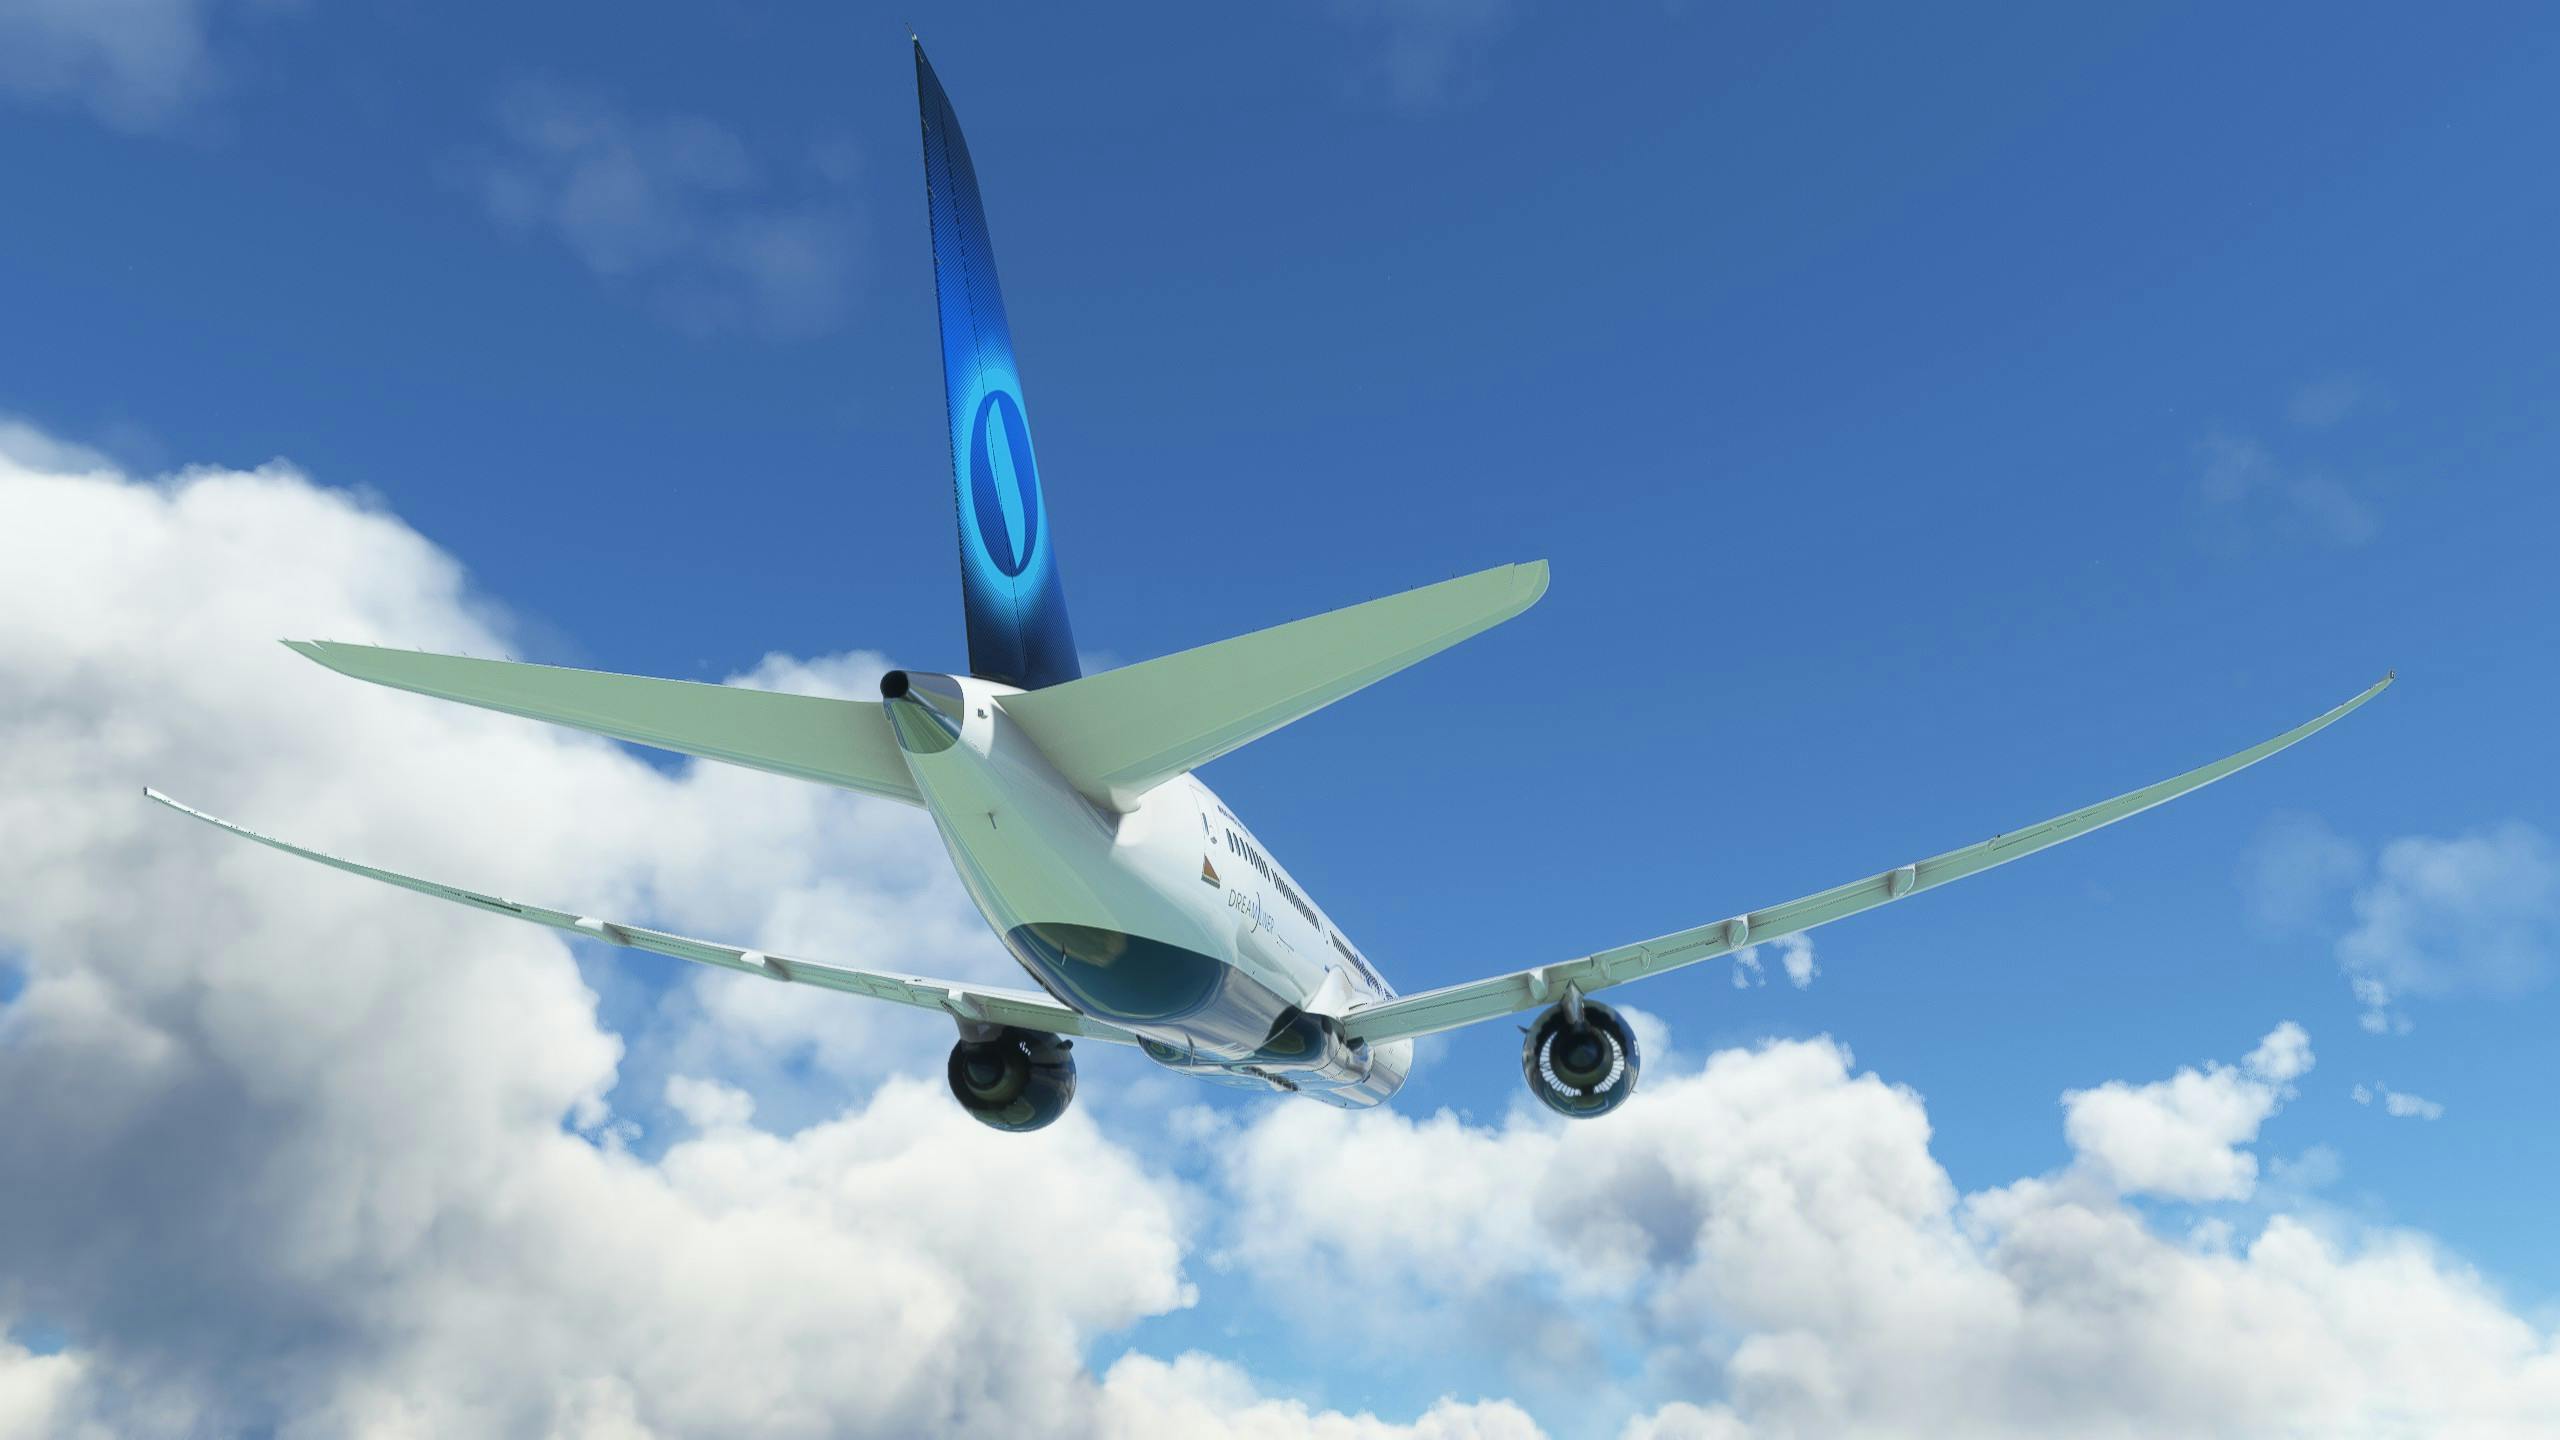 Is the heavy division 787 good and and worth downloading?secondly